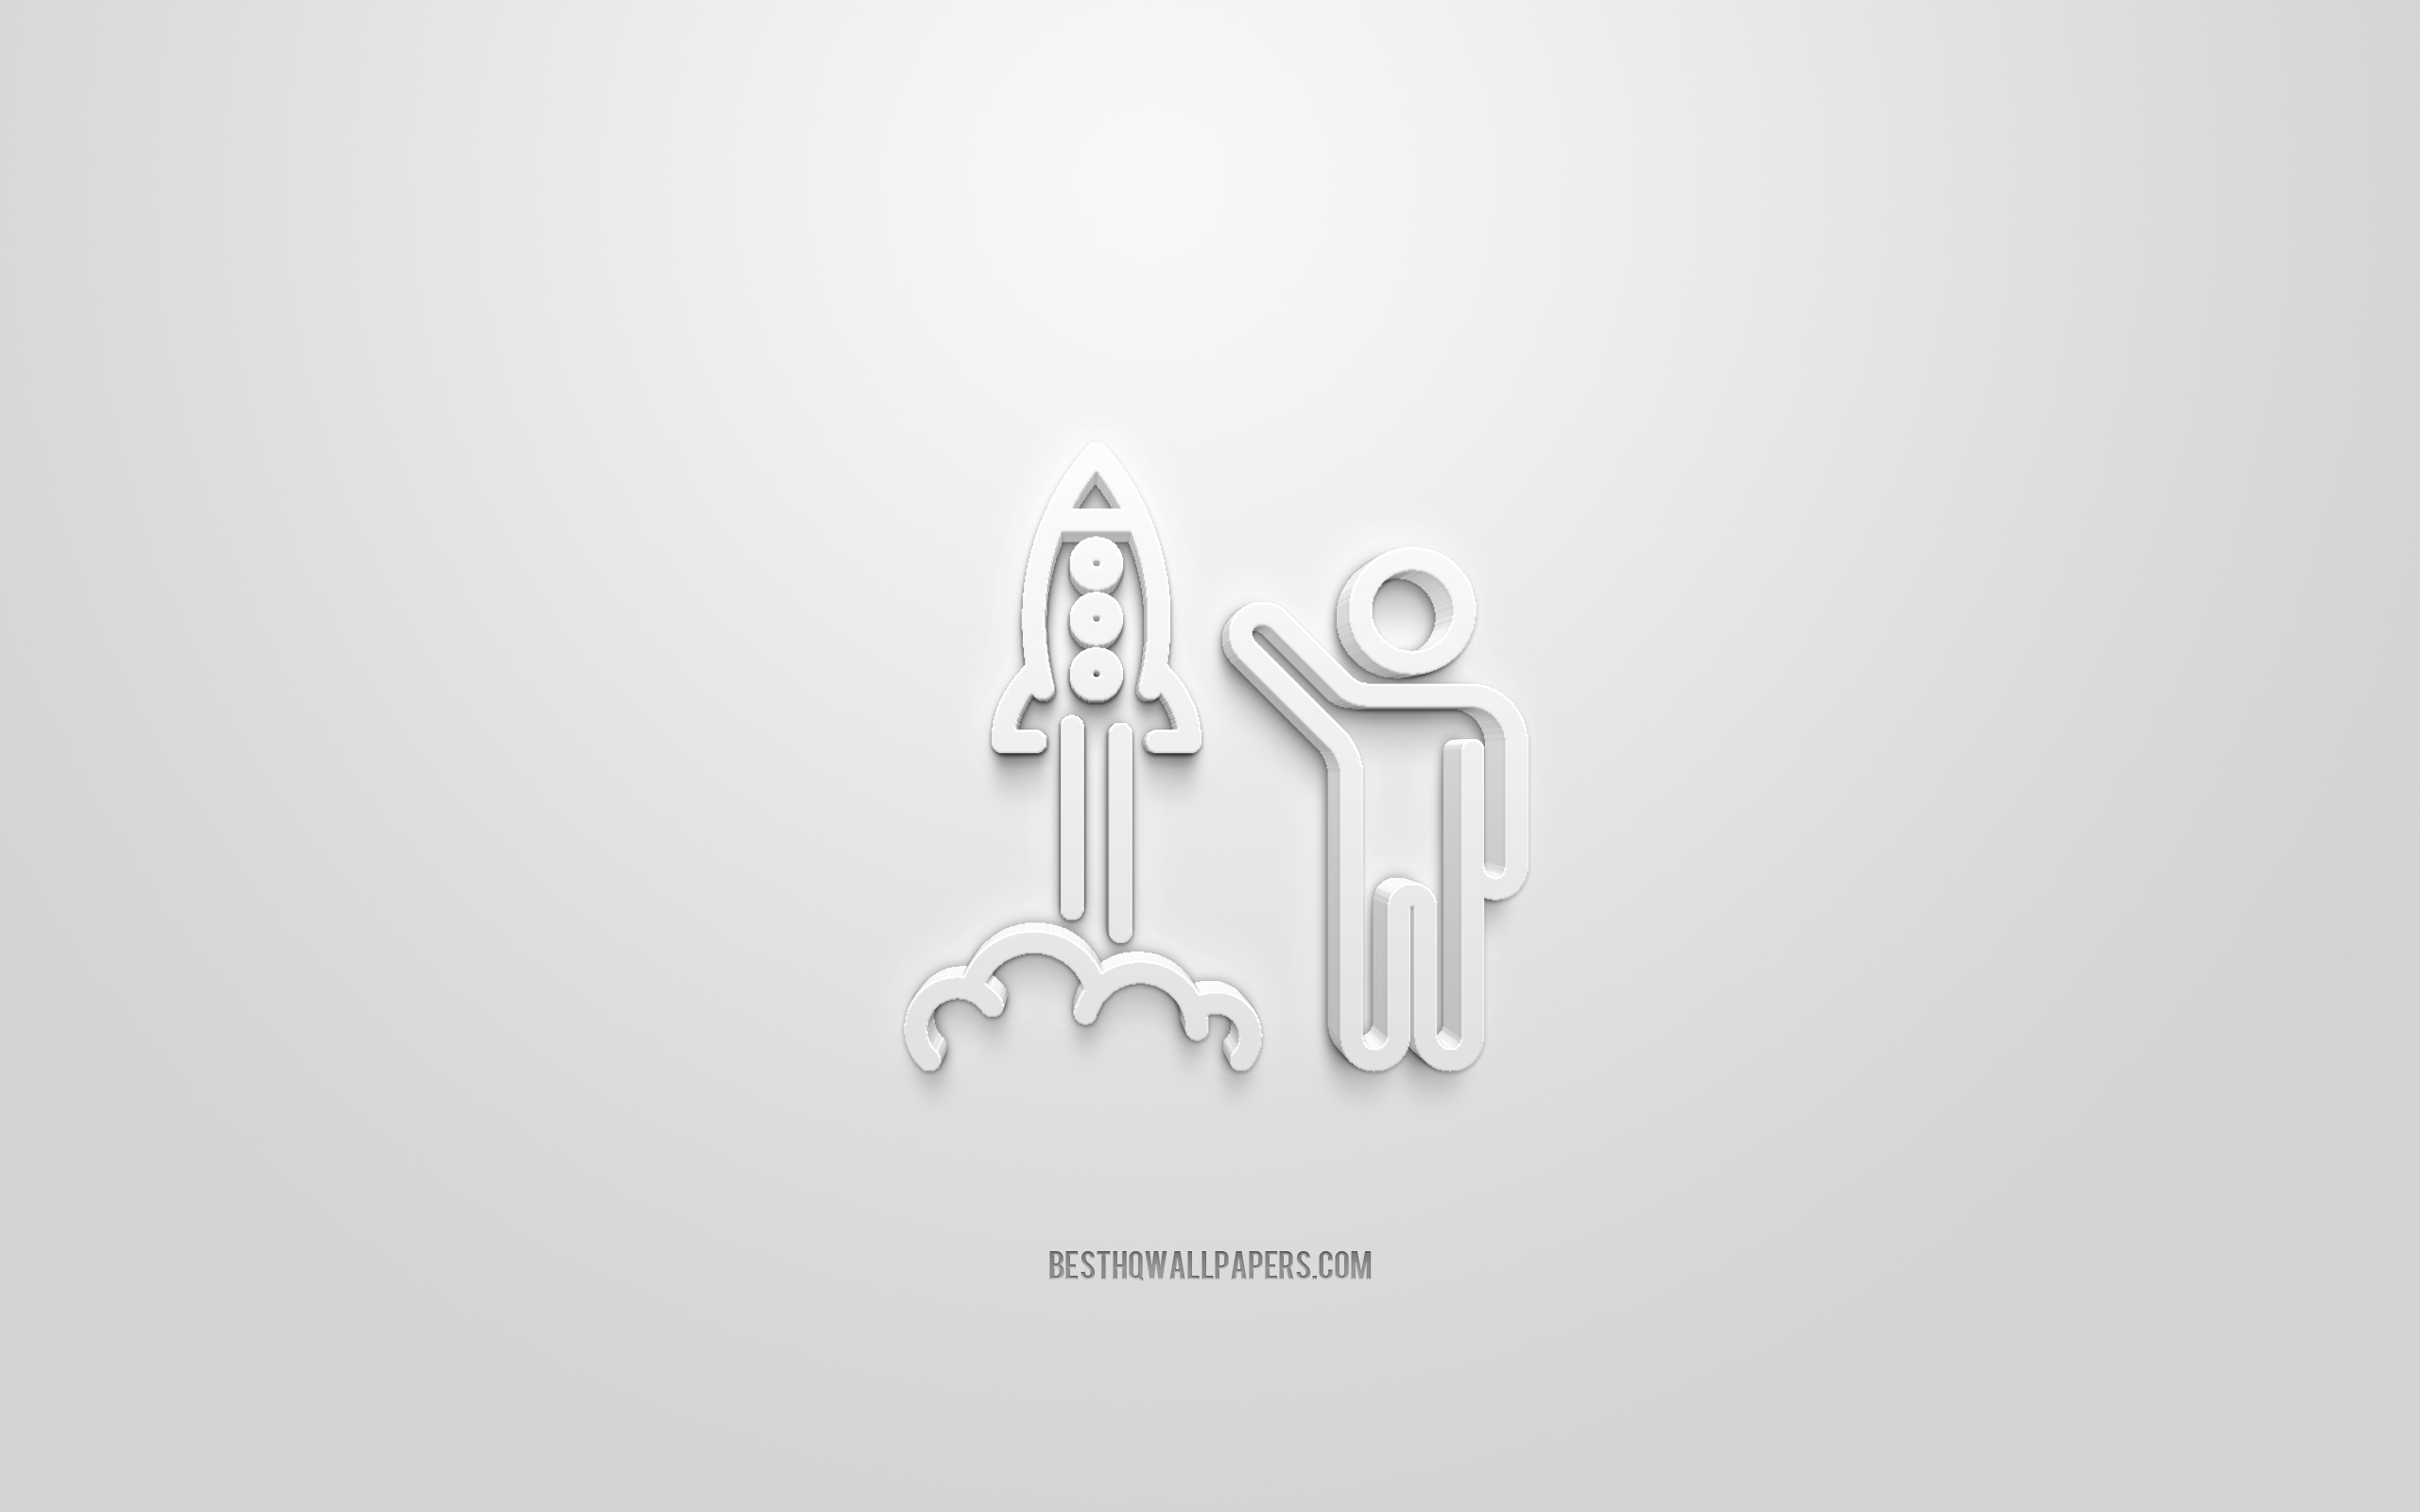 Download wallpapers start up d icon white background d symbols startup creative d art d icons start up sign business d icons for desktop with resolution x high quality hd pictures wallpapers